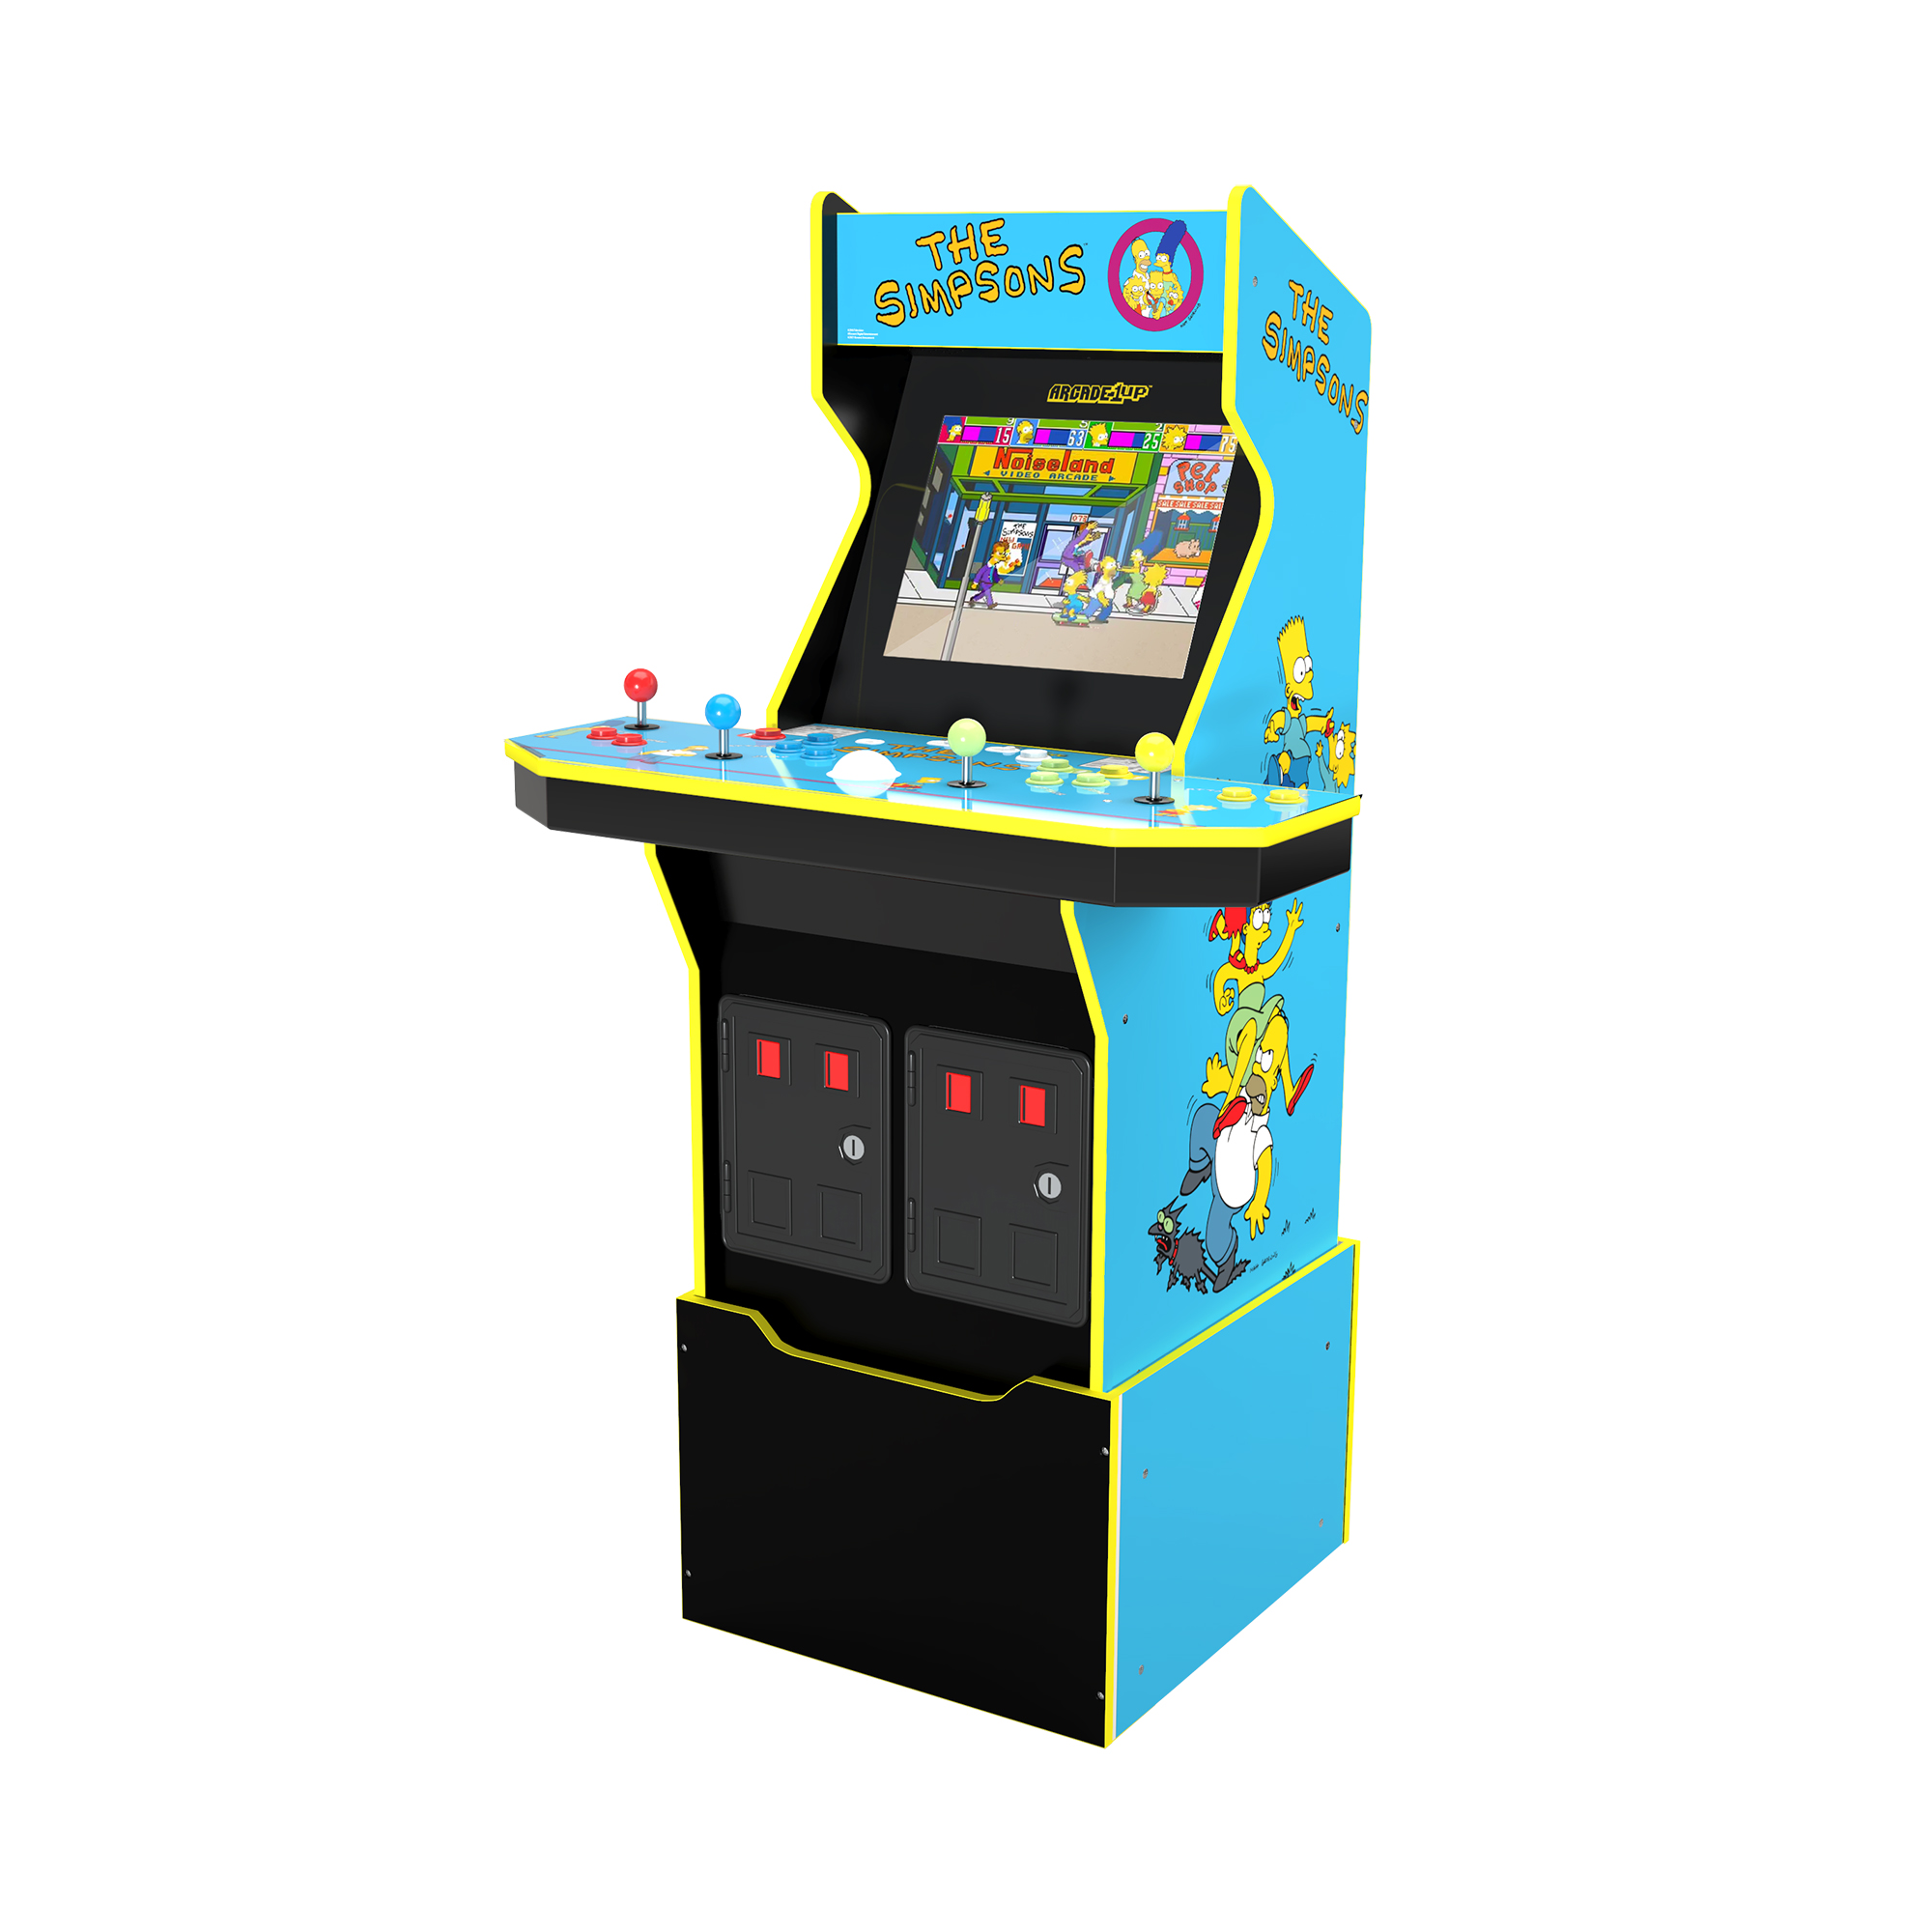 Arcade1UP The Simpsons (4-Player) Arcade with Riser, Lit Marquee, Lit Deck Protector, Wifi, and Exclusive Stool Bundle - image 2 of 10